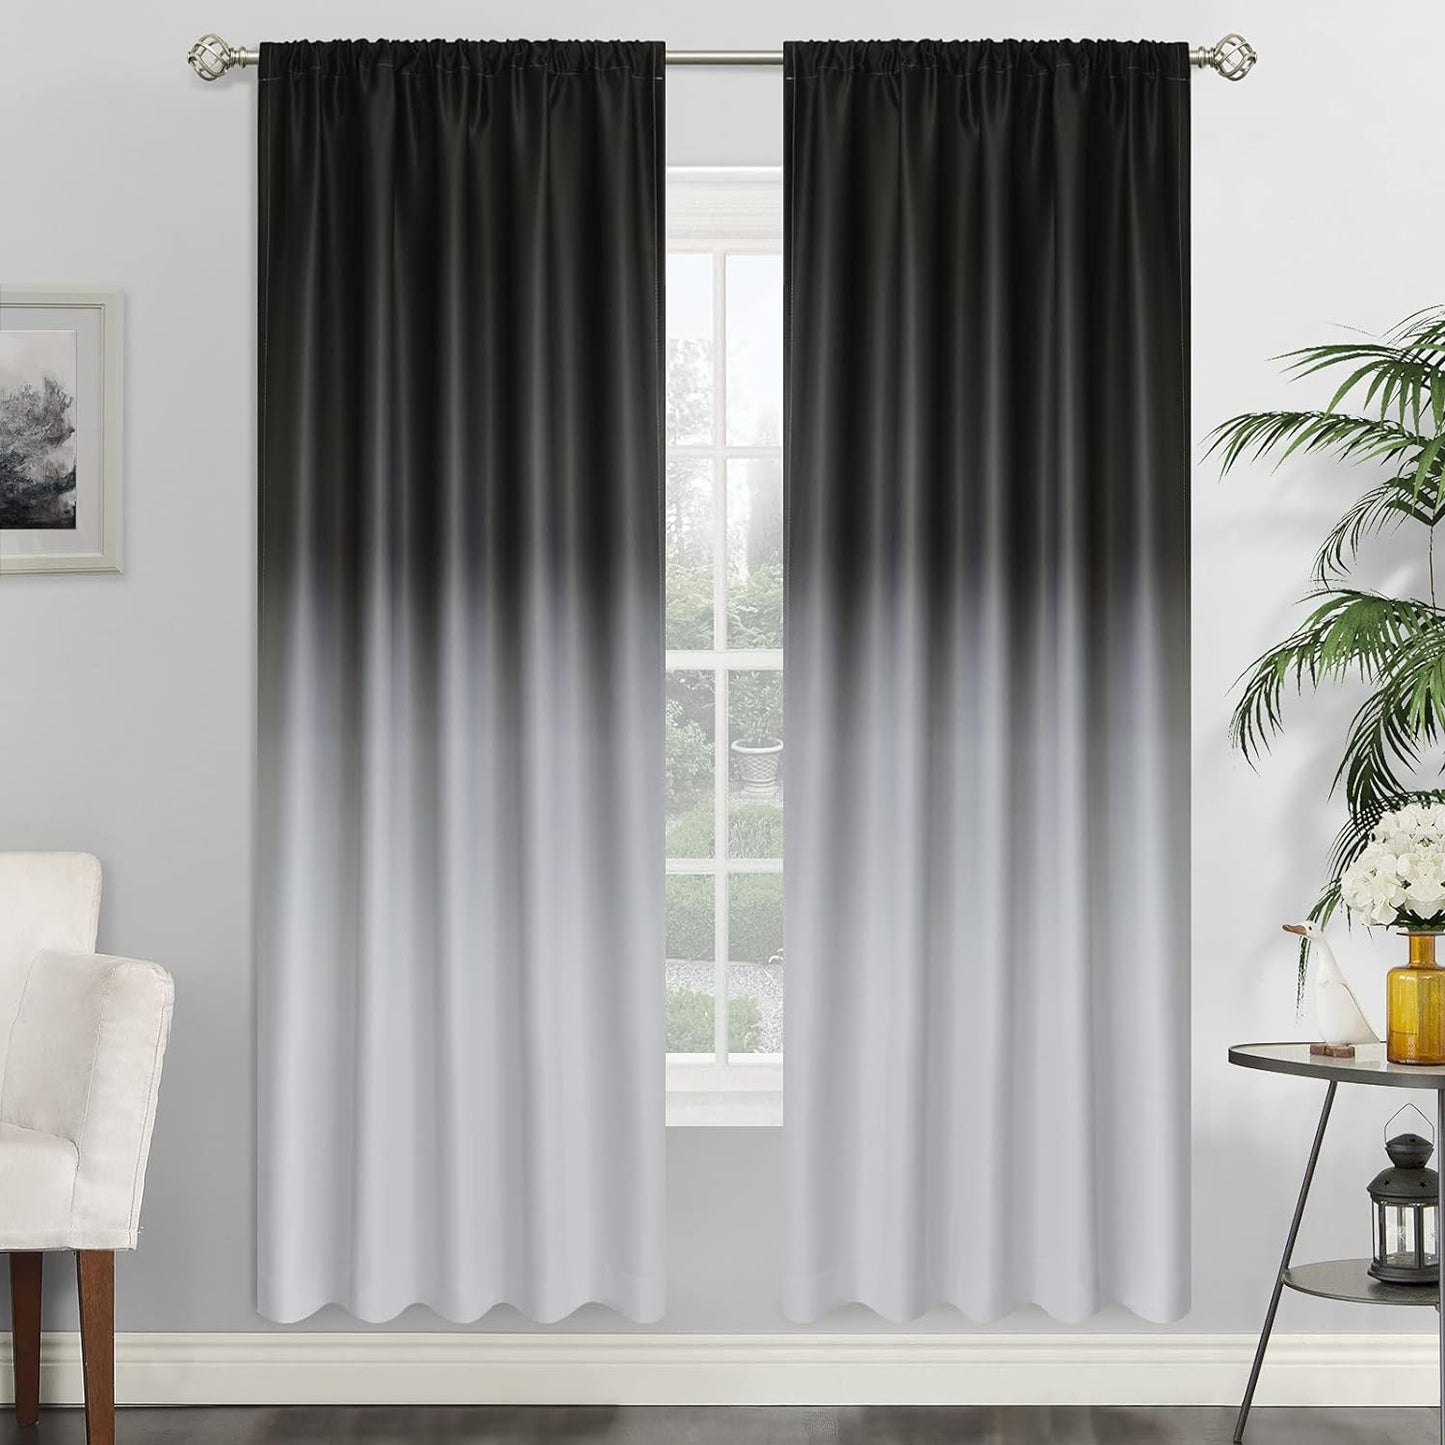 Simplehome Ombre Room Darkening Curtains for Bedroom, Light Blocking Gradient Purple to Greyish White Thermal Insulated Rod Pocket Window Curtains Drapes for Living Room,2 Panels, 52X84 Inches Length  SimpleHome Black 1 52W X 72L / 2 Panels 